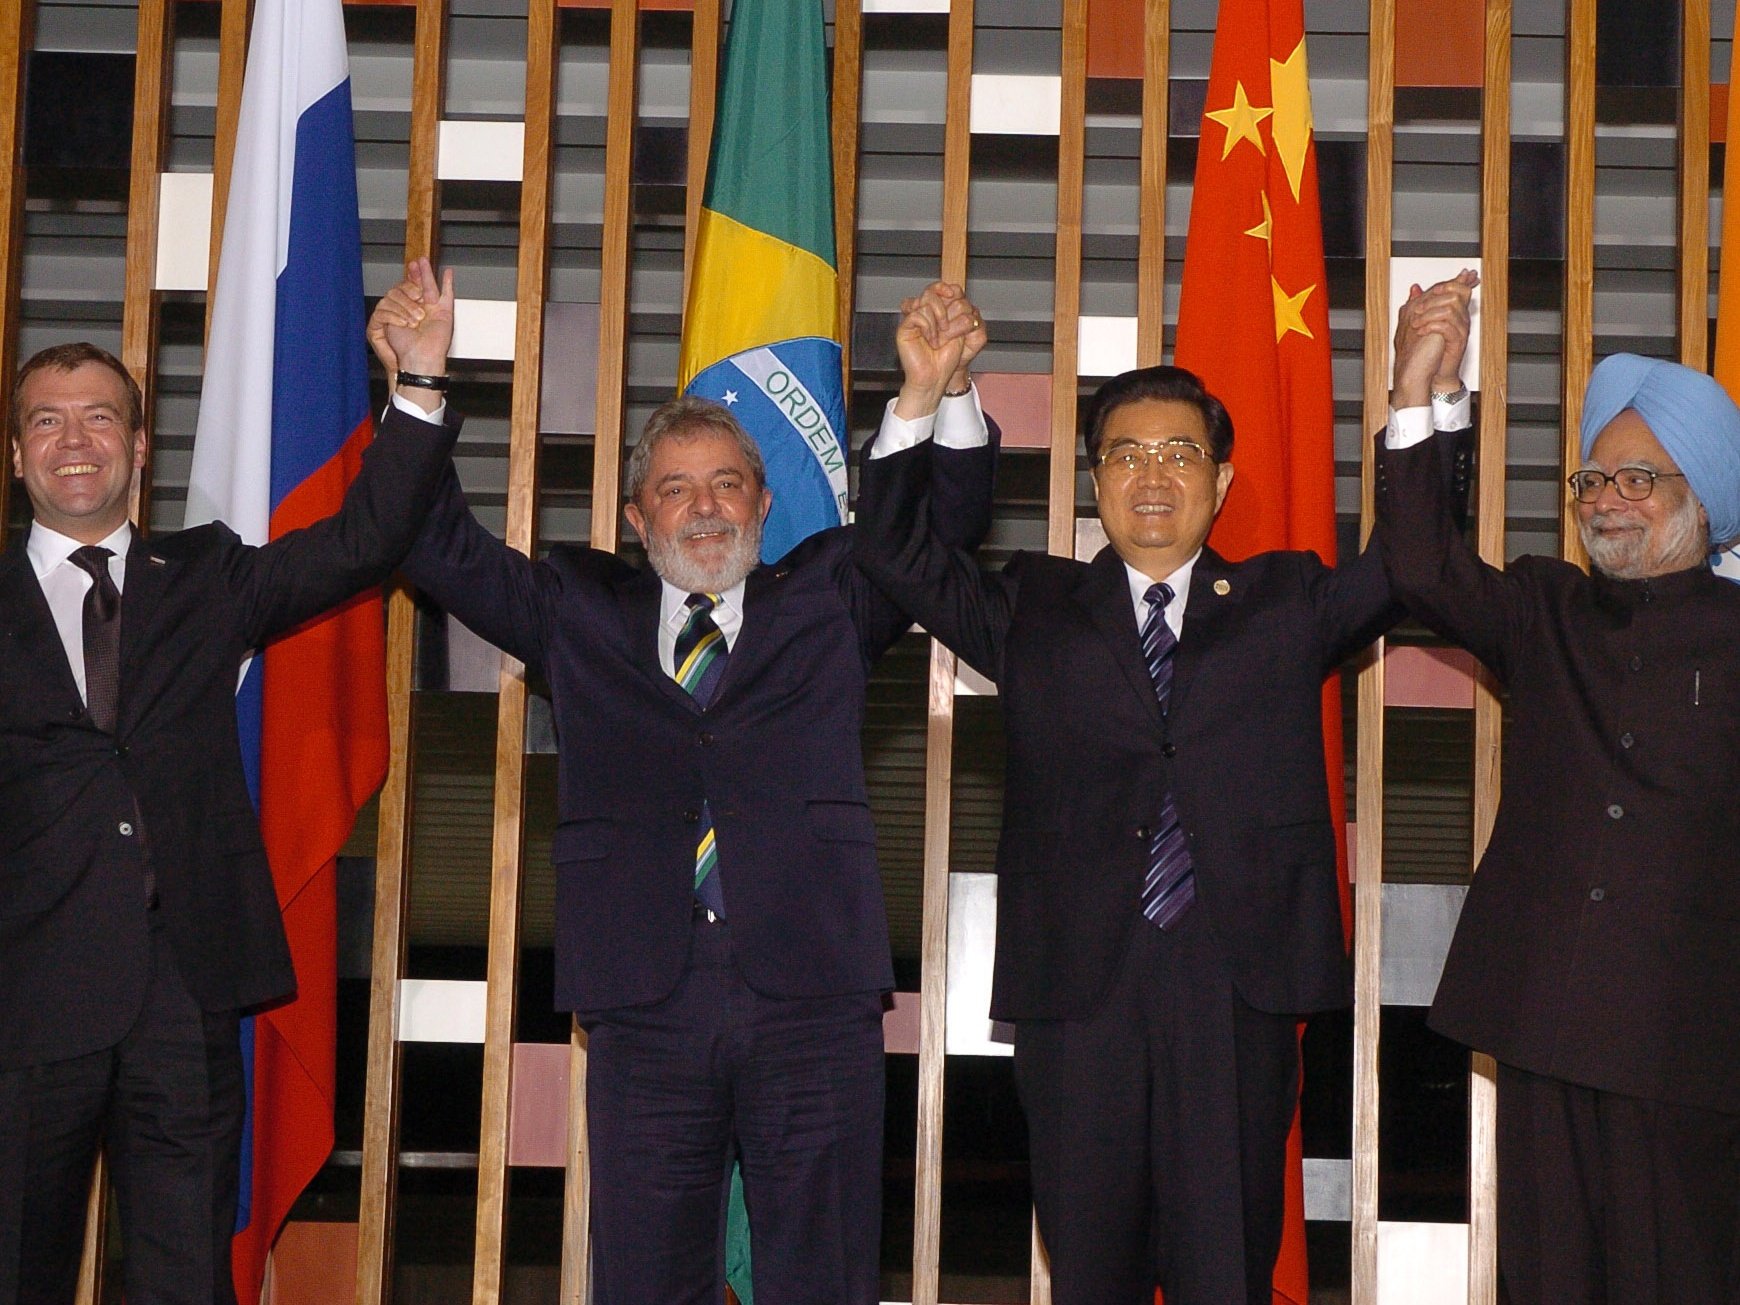 4/24 End of the Empire: France, Brazil, China, Come Together For a Multipolar World